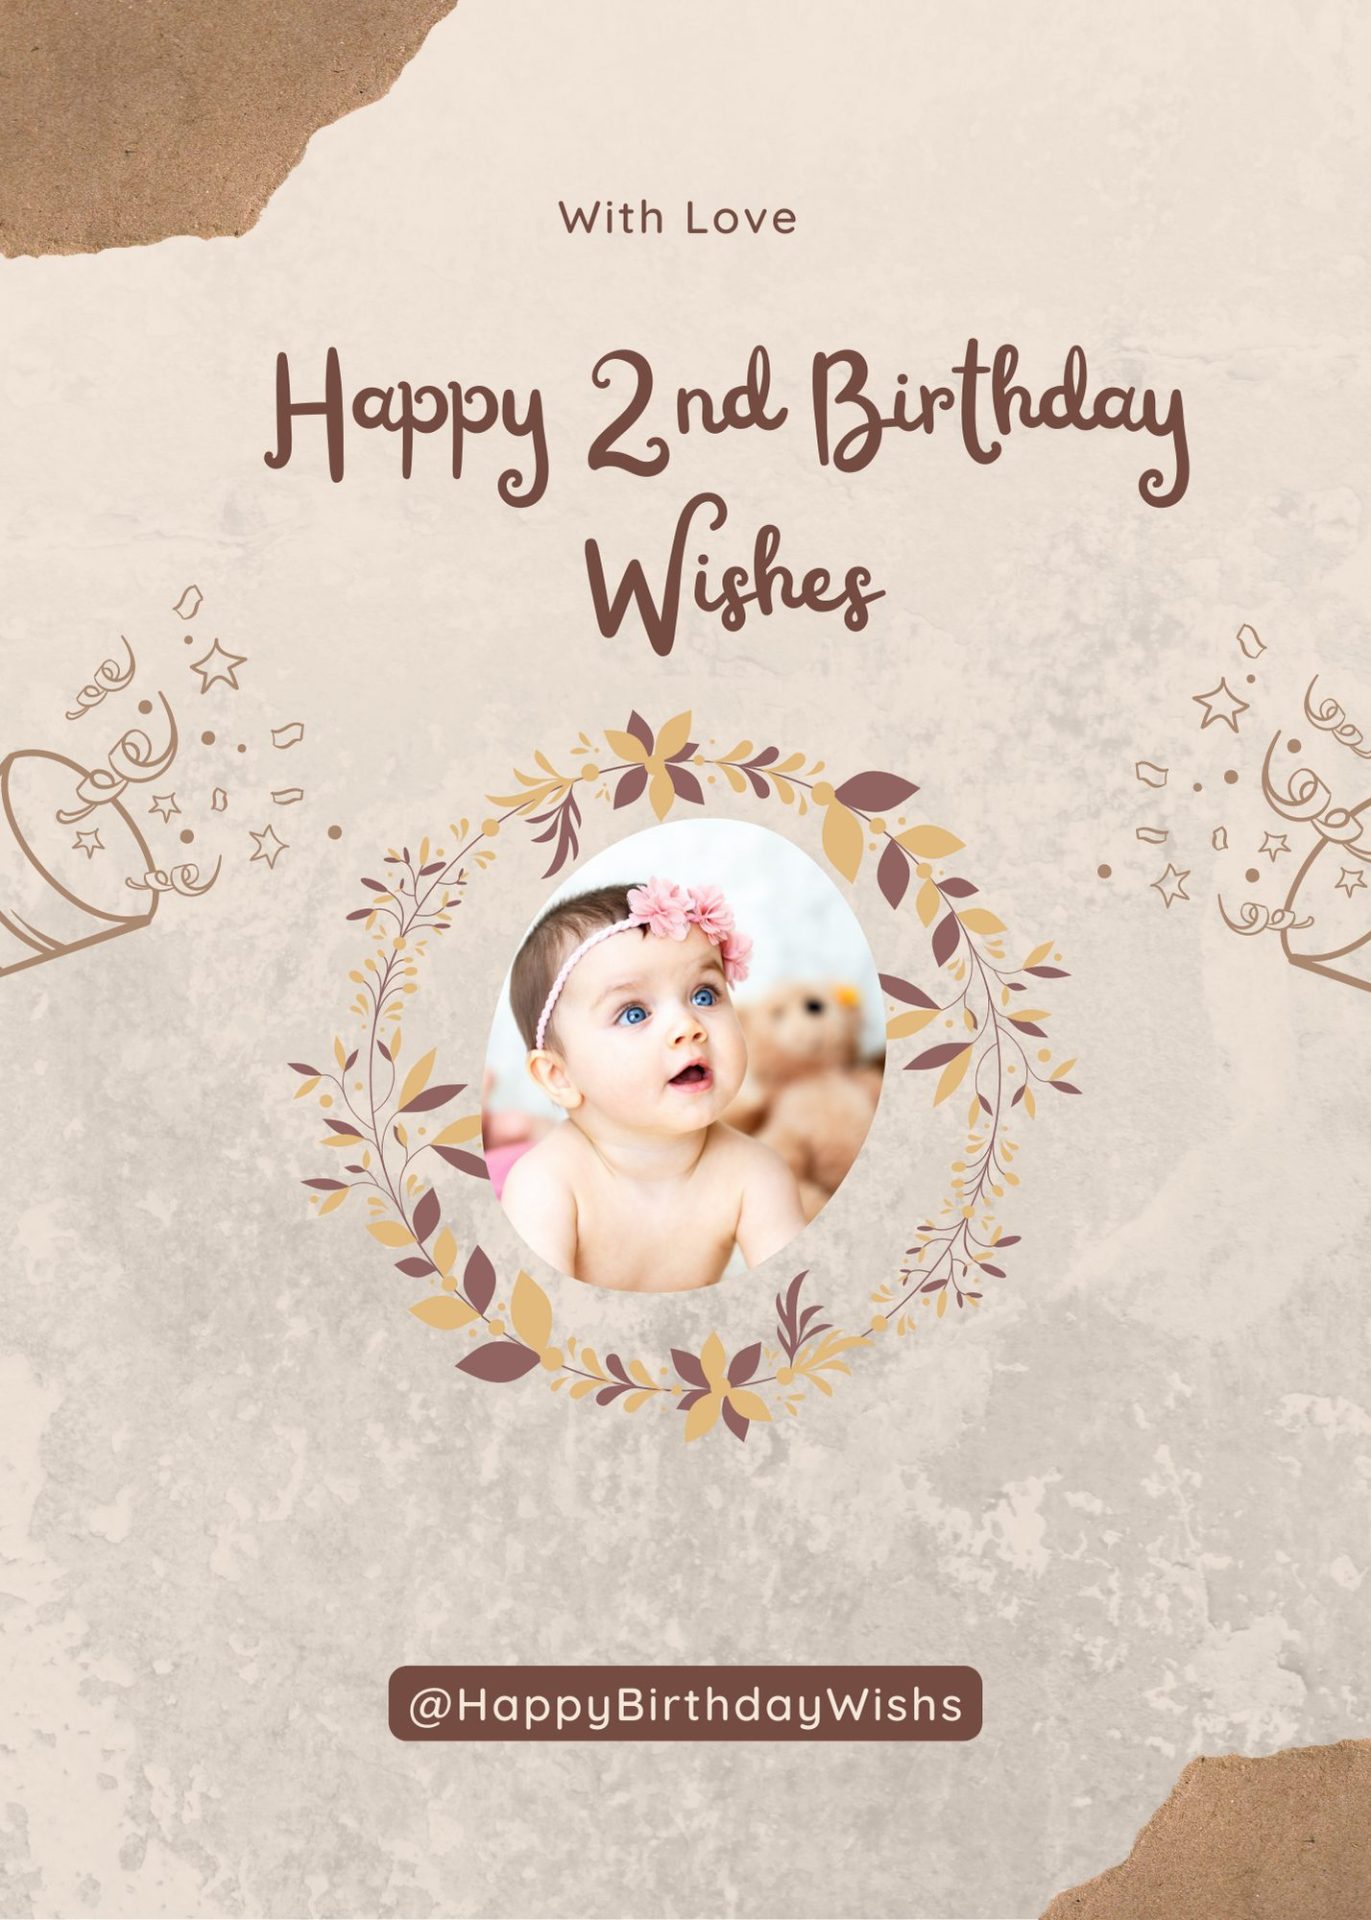 Happy 2nd Birthday Wishes For Baby Girl & Boy